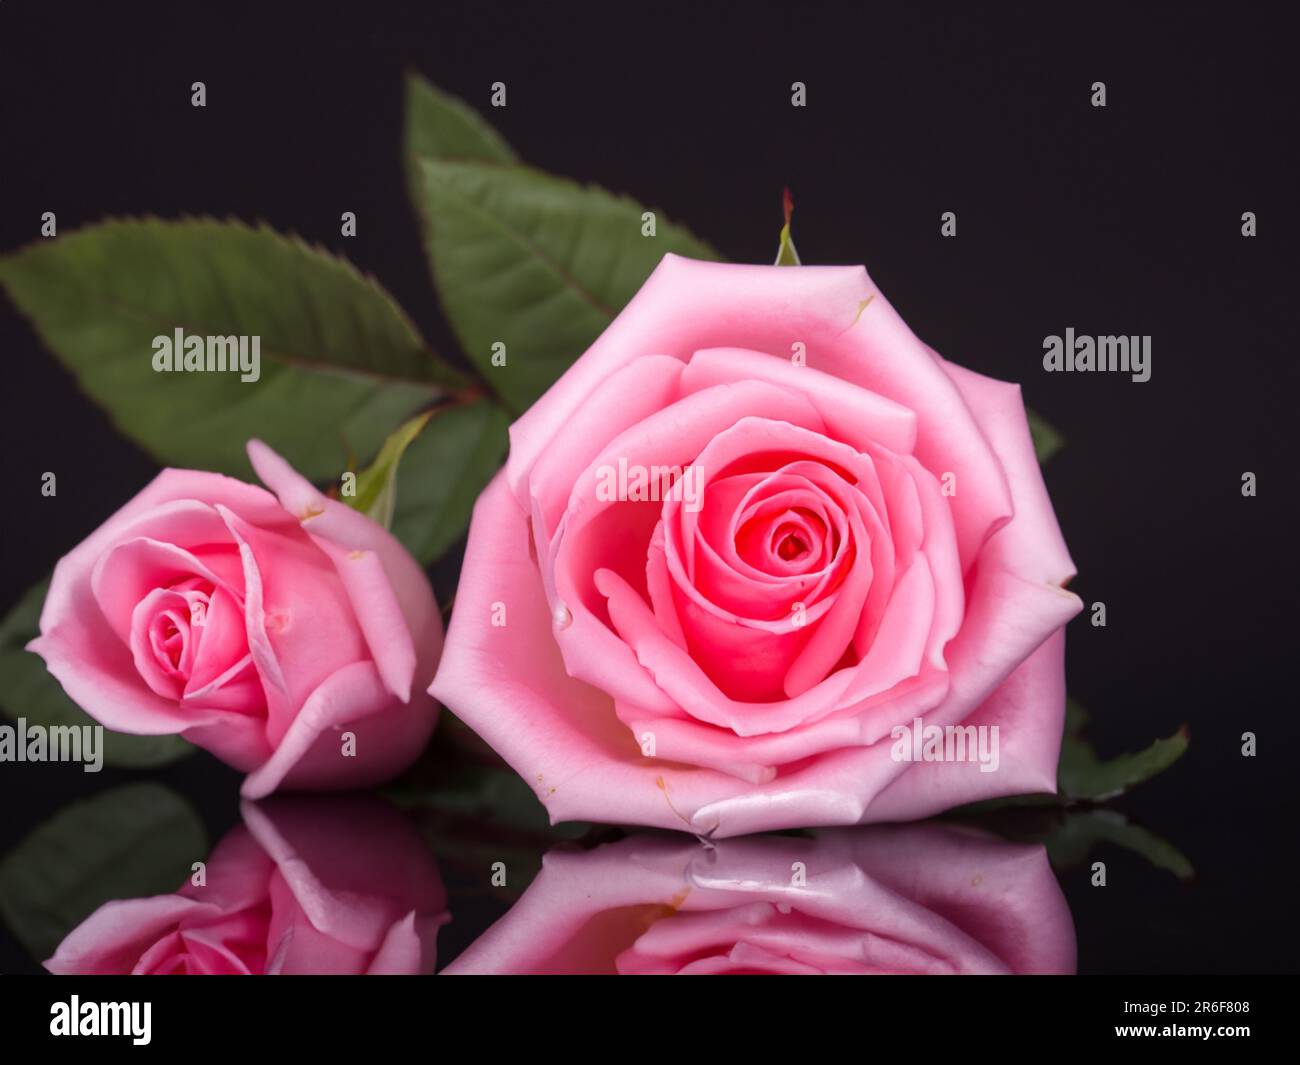 two pink roses with green leaves on a black background with a reflection. . Stock Photo